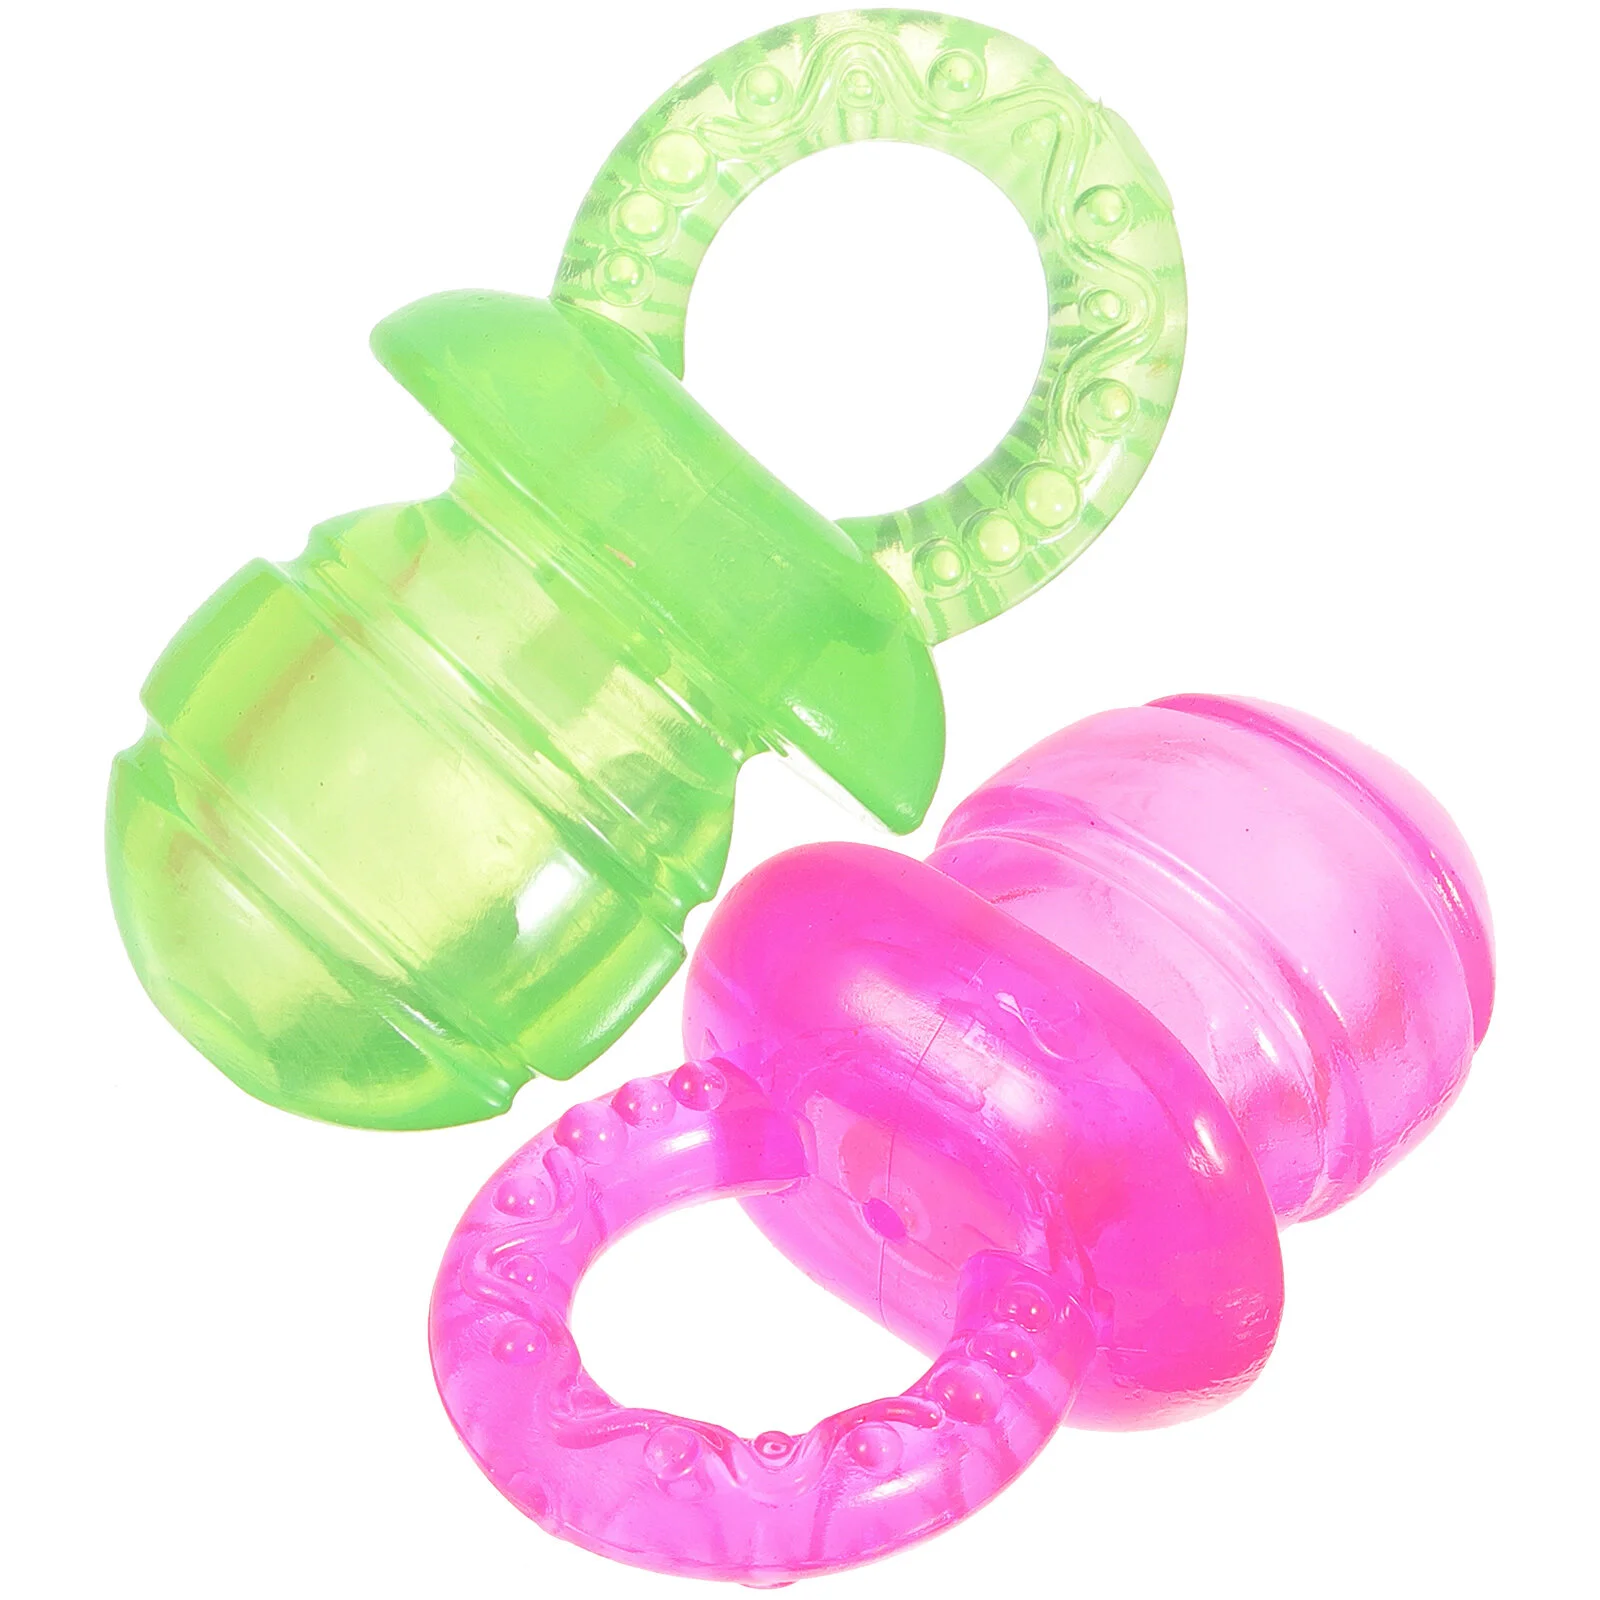 

2pcs Pet Teether Chew Toy Colorful Teething Toy Interactive Toy Dog Teething Tool